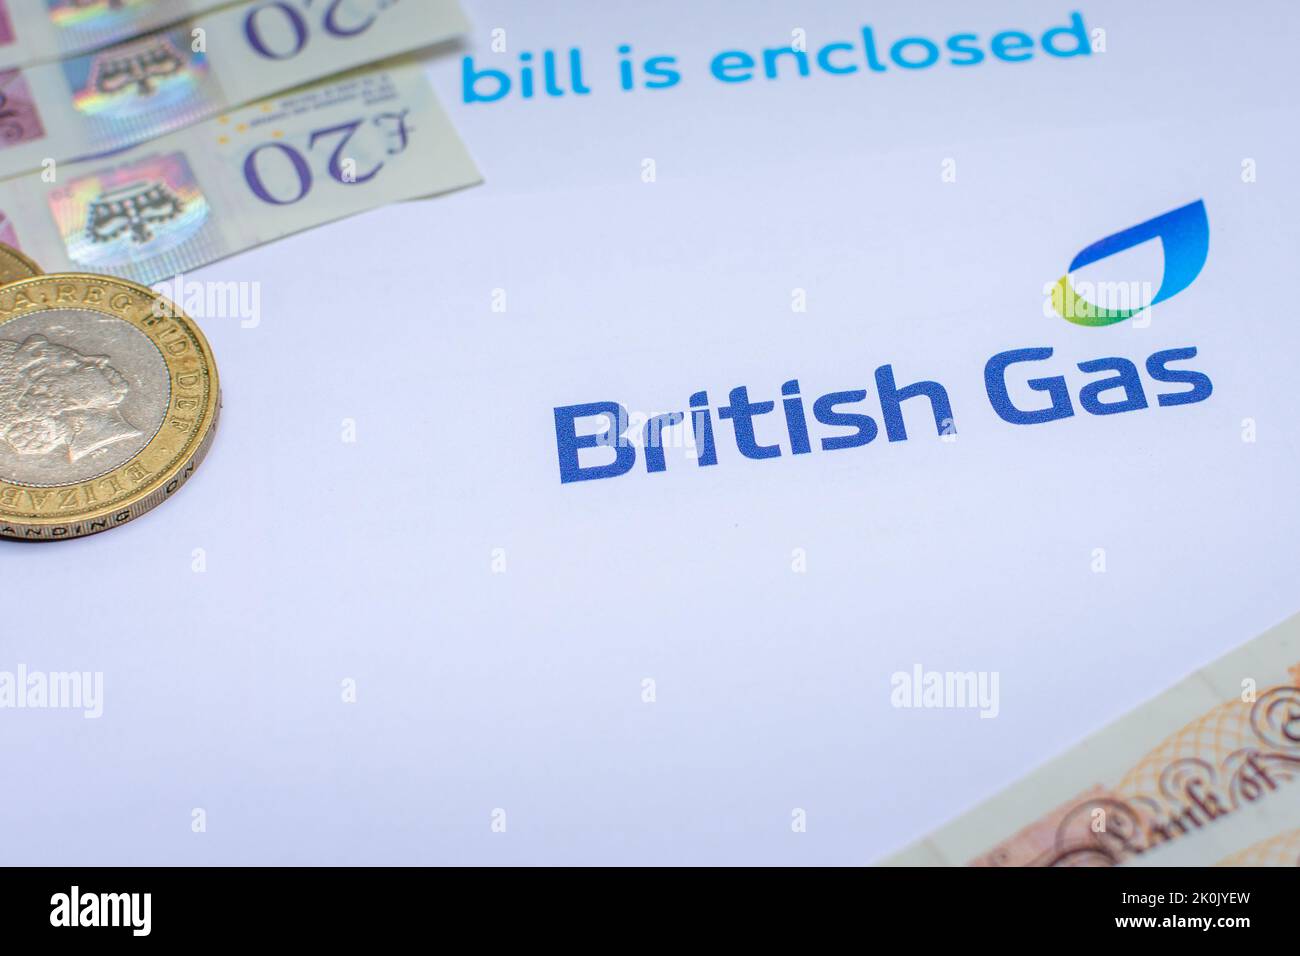 A British Gas bill with UK currency. Cost of living and inflation with increasing prices is affecting many people. Stock Photo